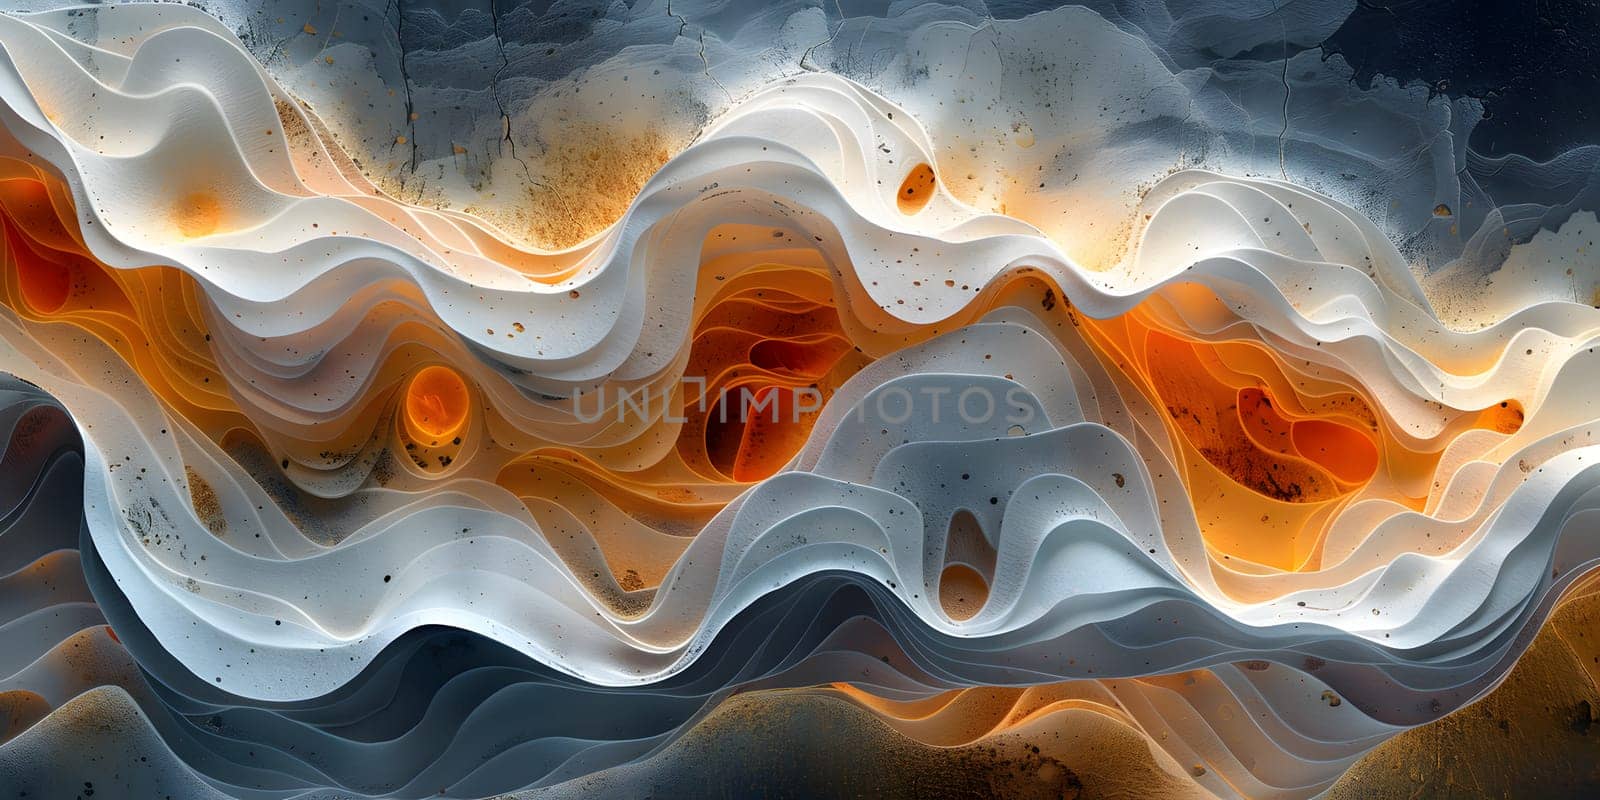 A close up of an art piece depicting a wave in vibrant orange and electric blue colors, capturing the energy and heat of the water in a mesmerizing pattern